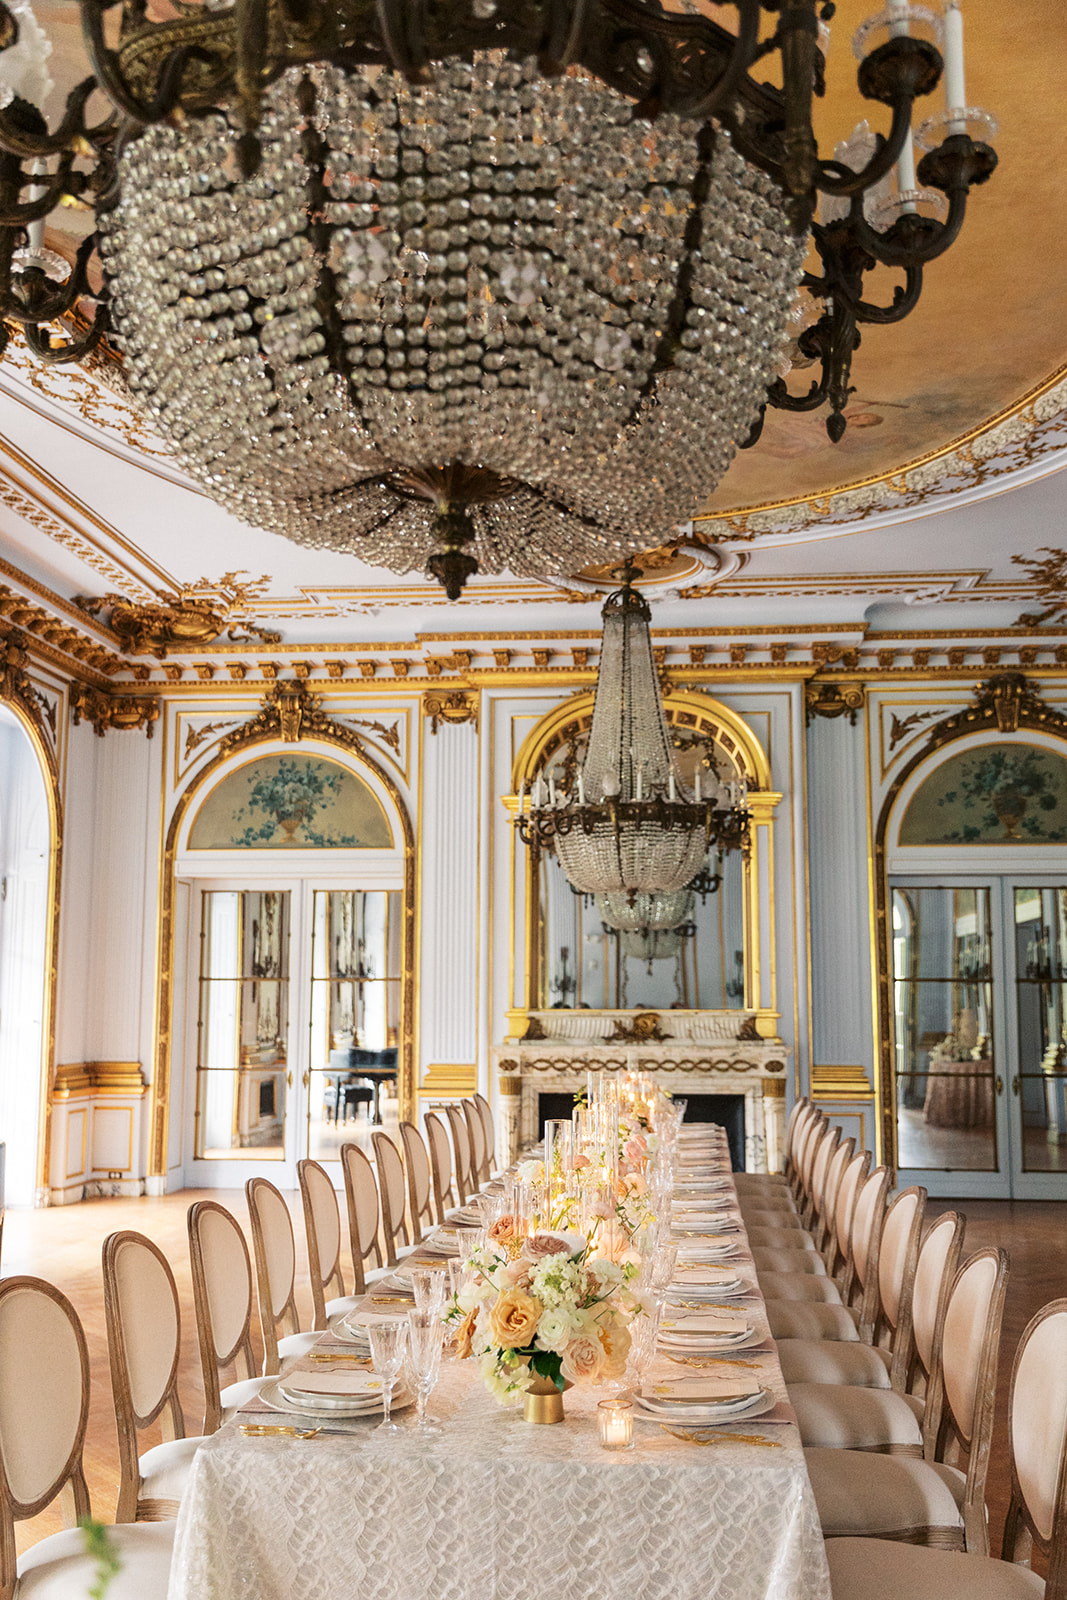 Details of a wedding reception table set up with ornate chairs and large chandeliers in a gold trim room at the Elkins Estate